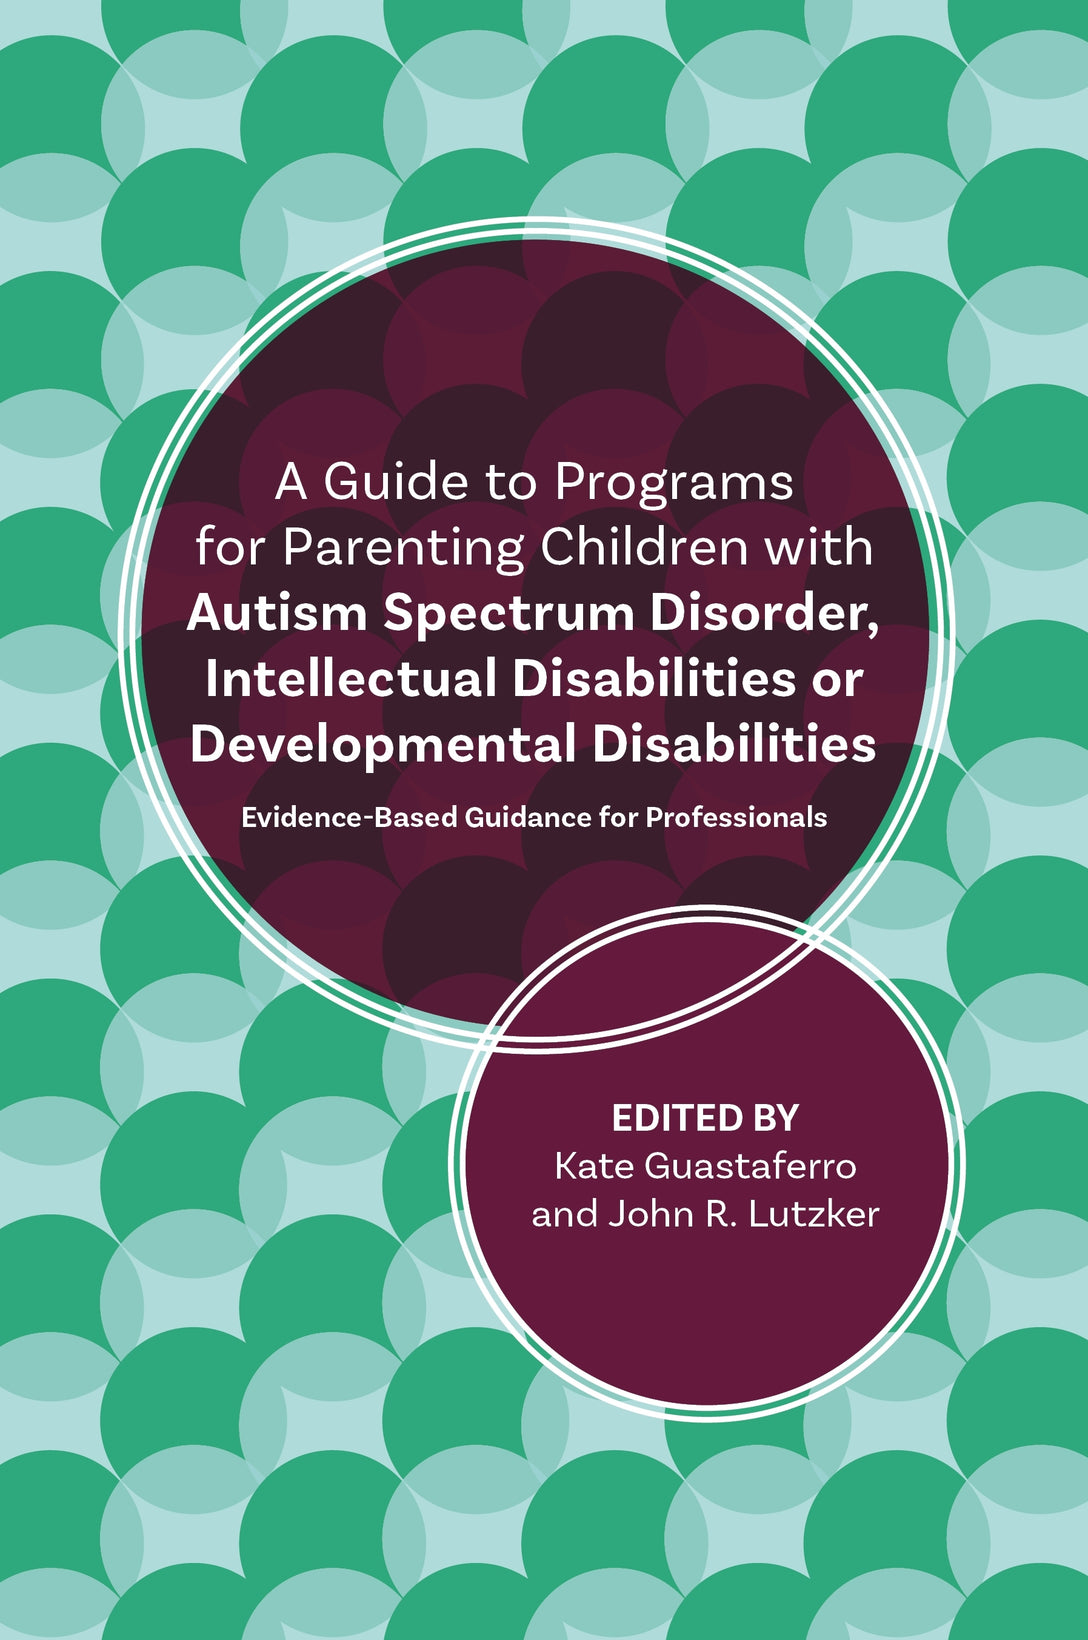 A Guide to Programs for Parenting Children with Autism Spectrum Disorder, Intellectual Disabilities or Developmental Disabilities by John R. Lutzker, Katelyn M. Guastaferro